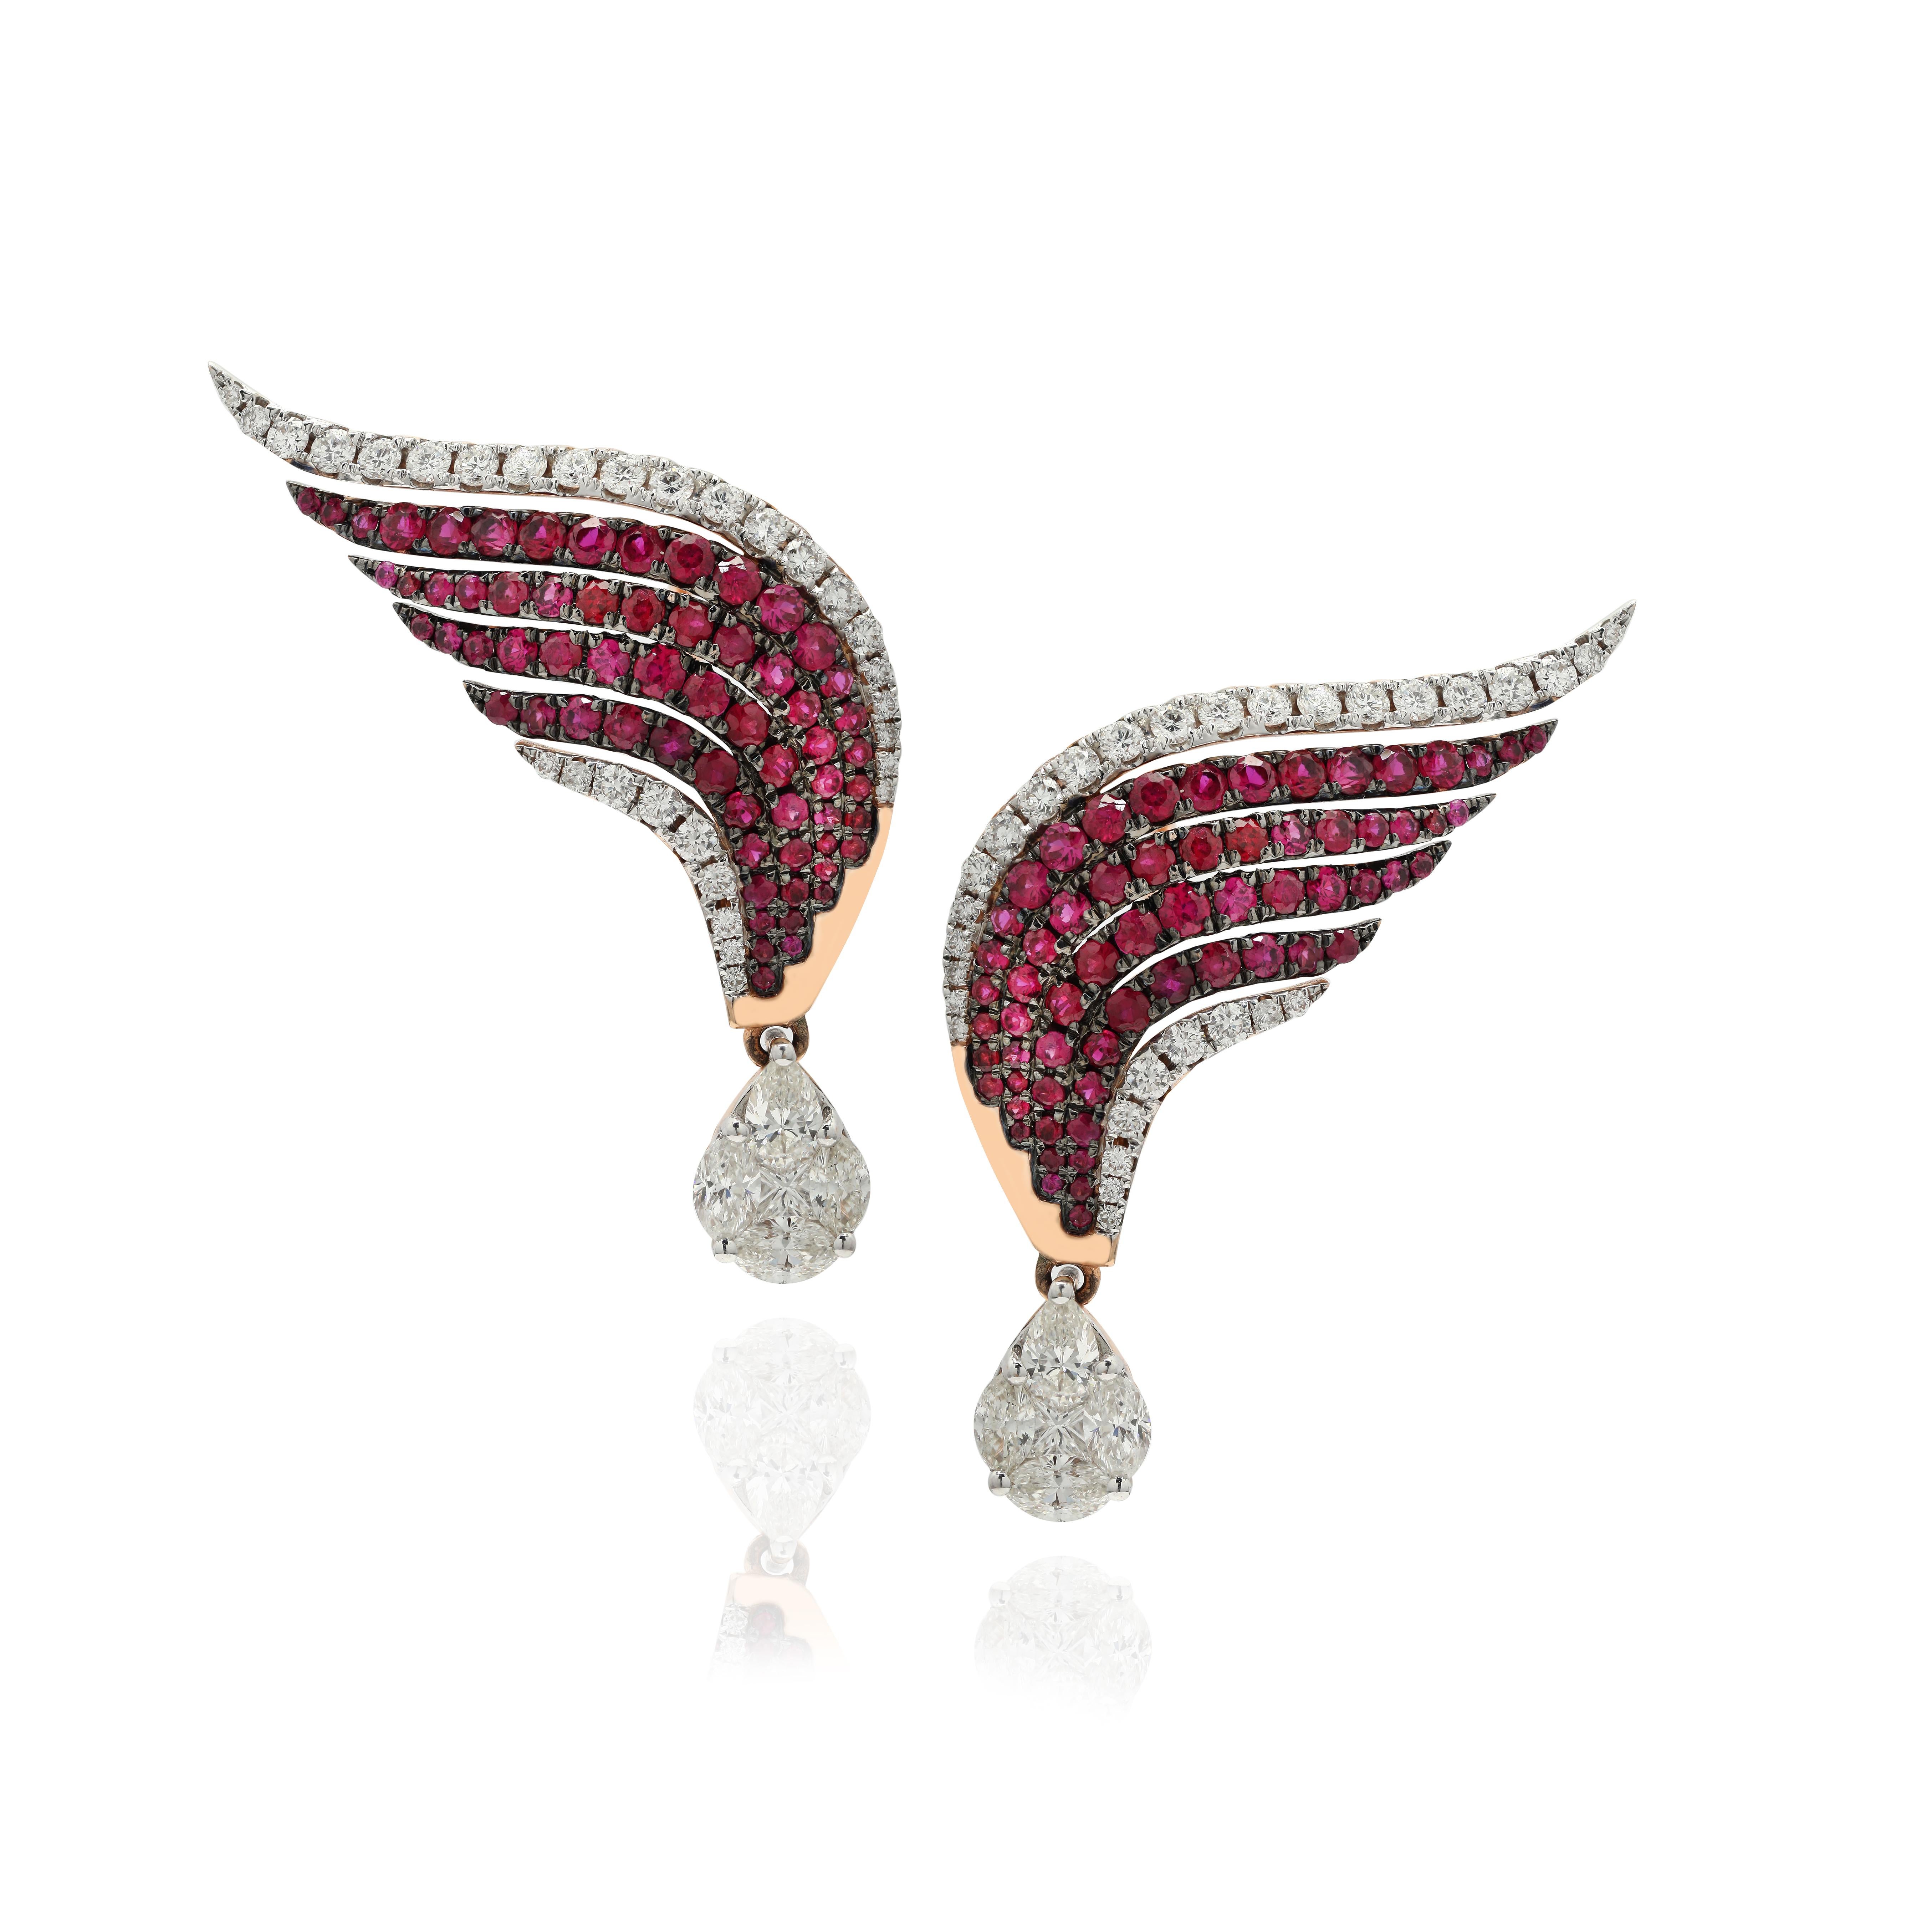 Ruby and diamond dangle earrings to make a statement with your look. These earrings create a sparkling, luxurious look featuring round cut gemstone.
If you love to gravitate towards unique styles, this piece of jewelry is perfect for you.

PRODUCT